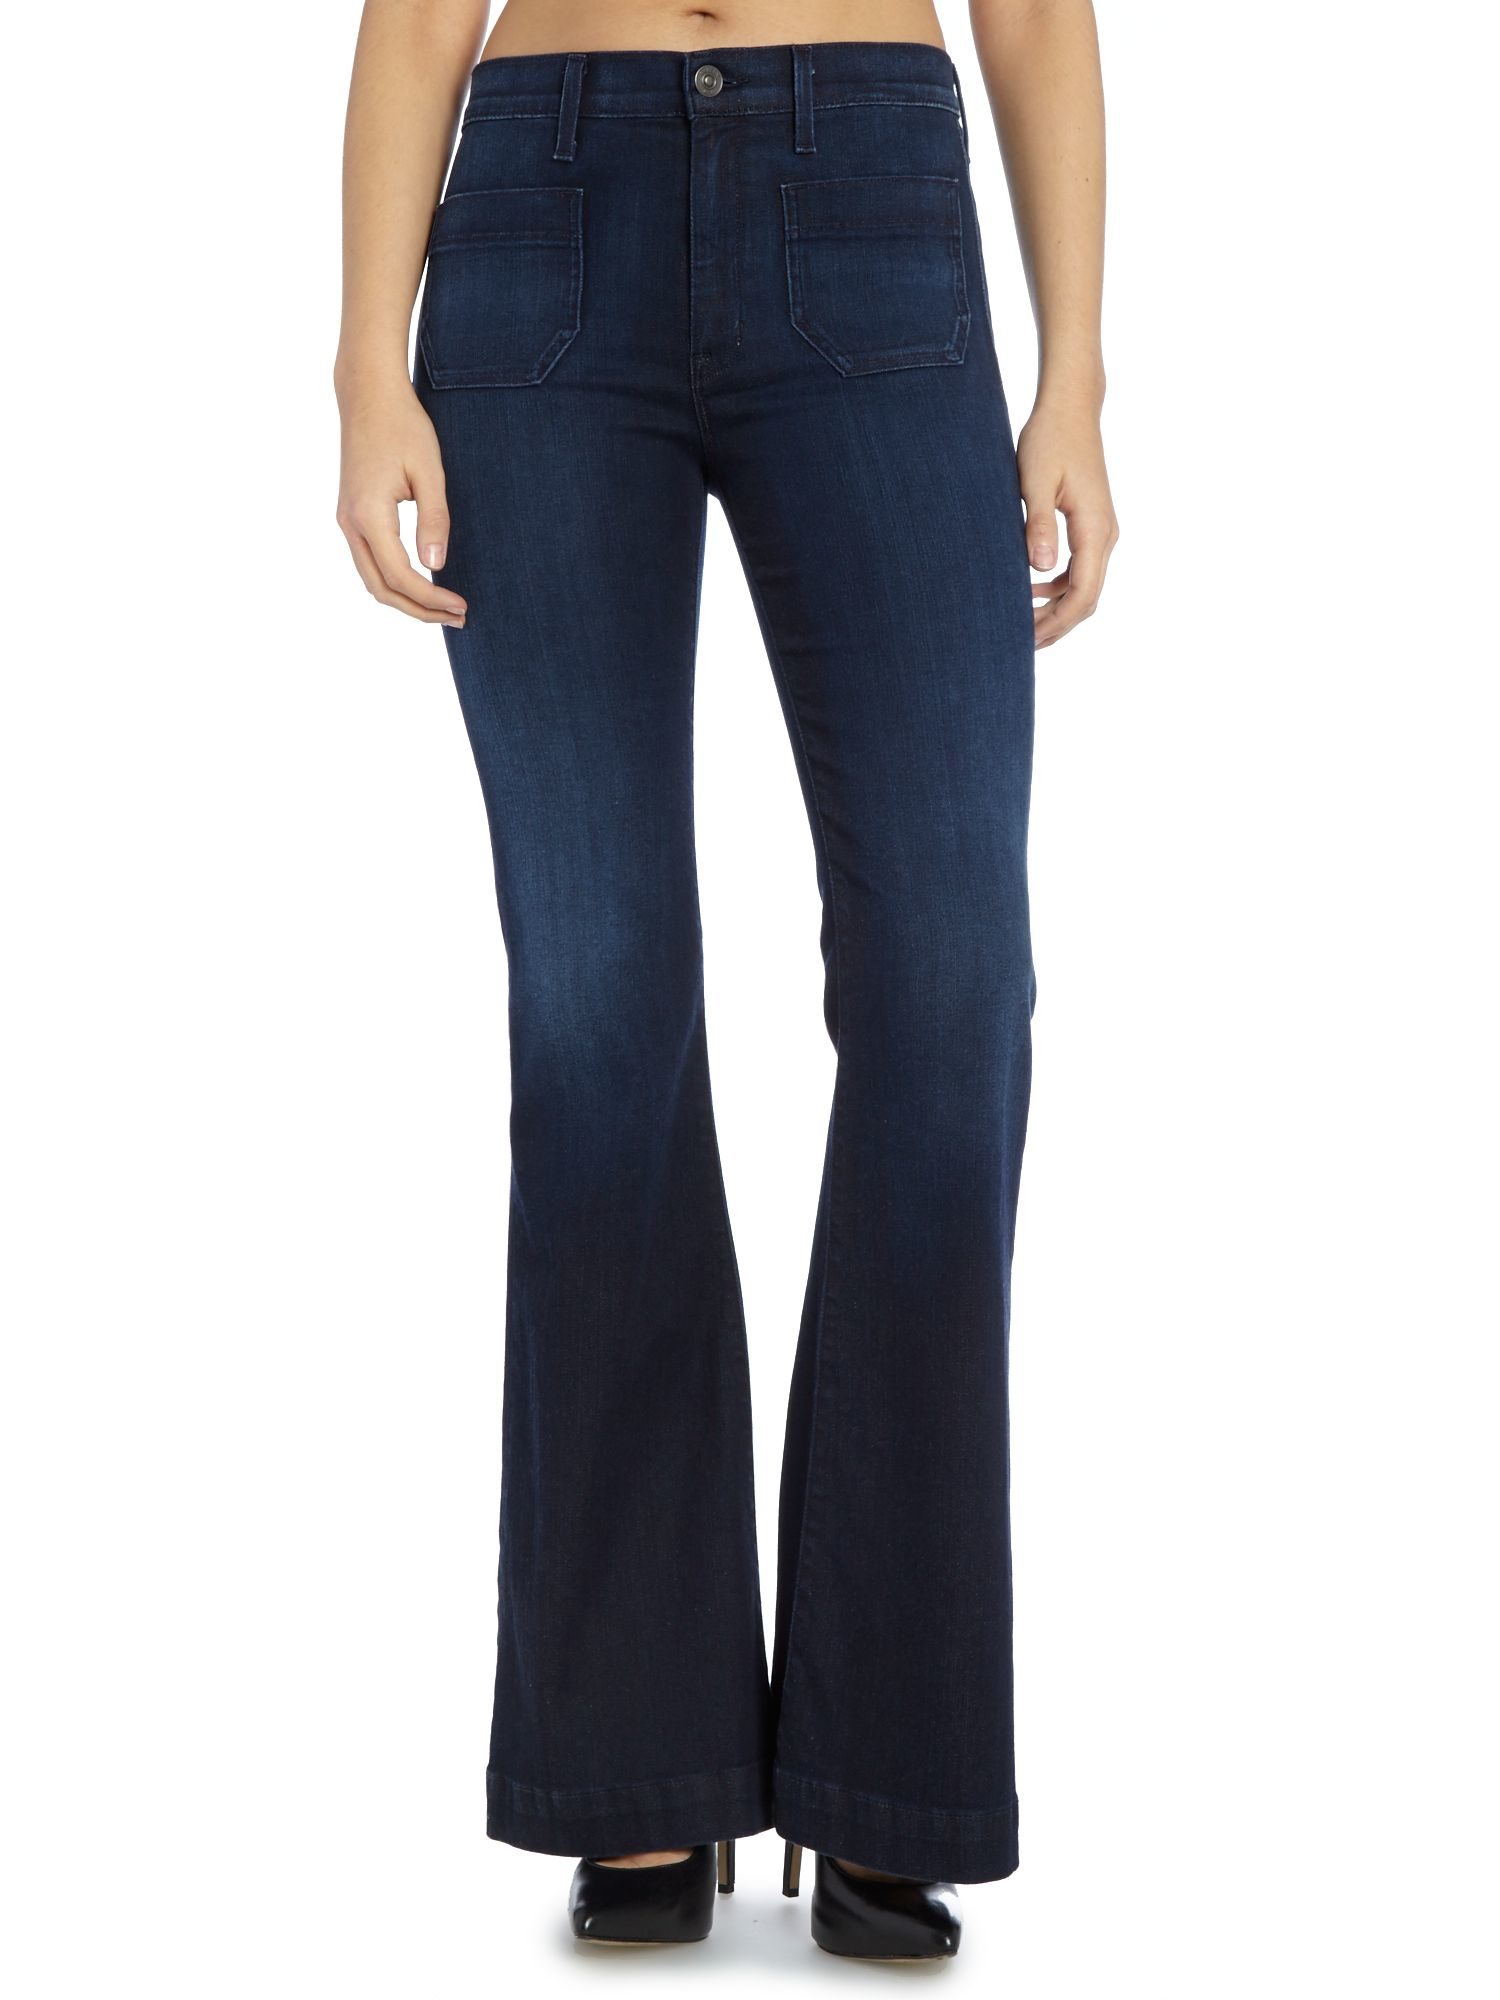 Hudson jeans Taylor High Waist Flare Jean In Rogue Waves in Blue | Lyst